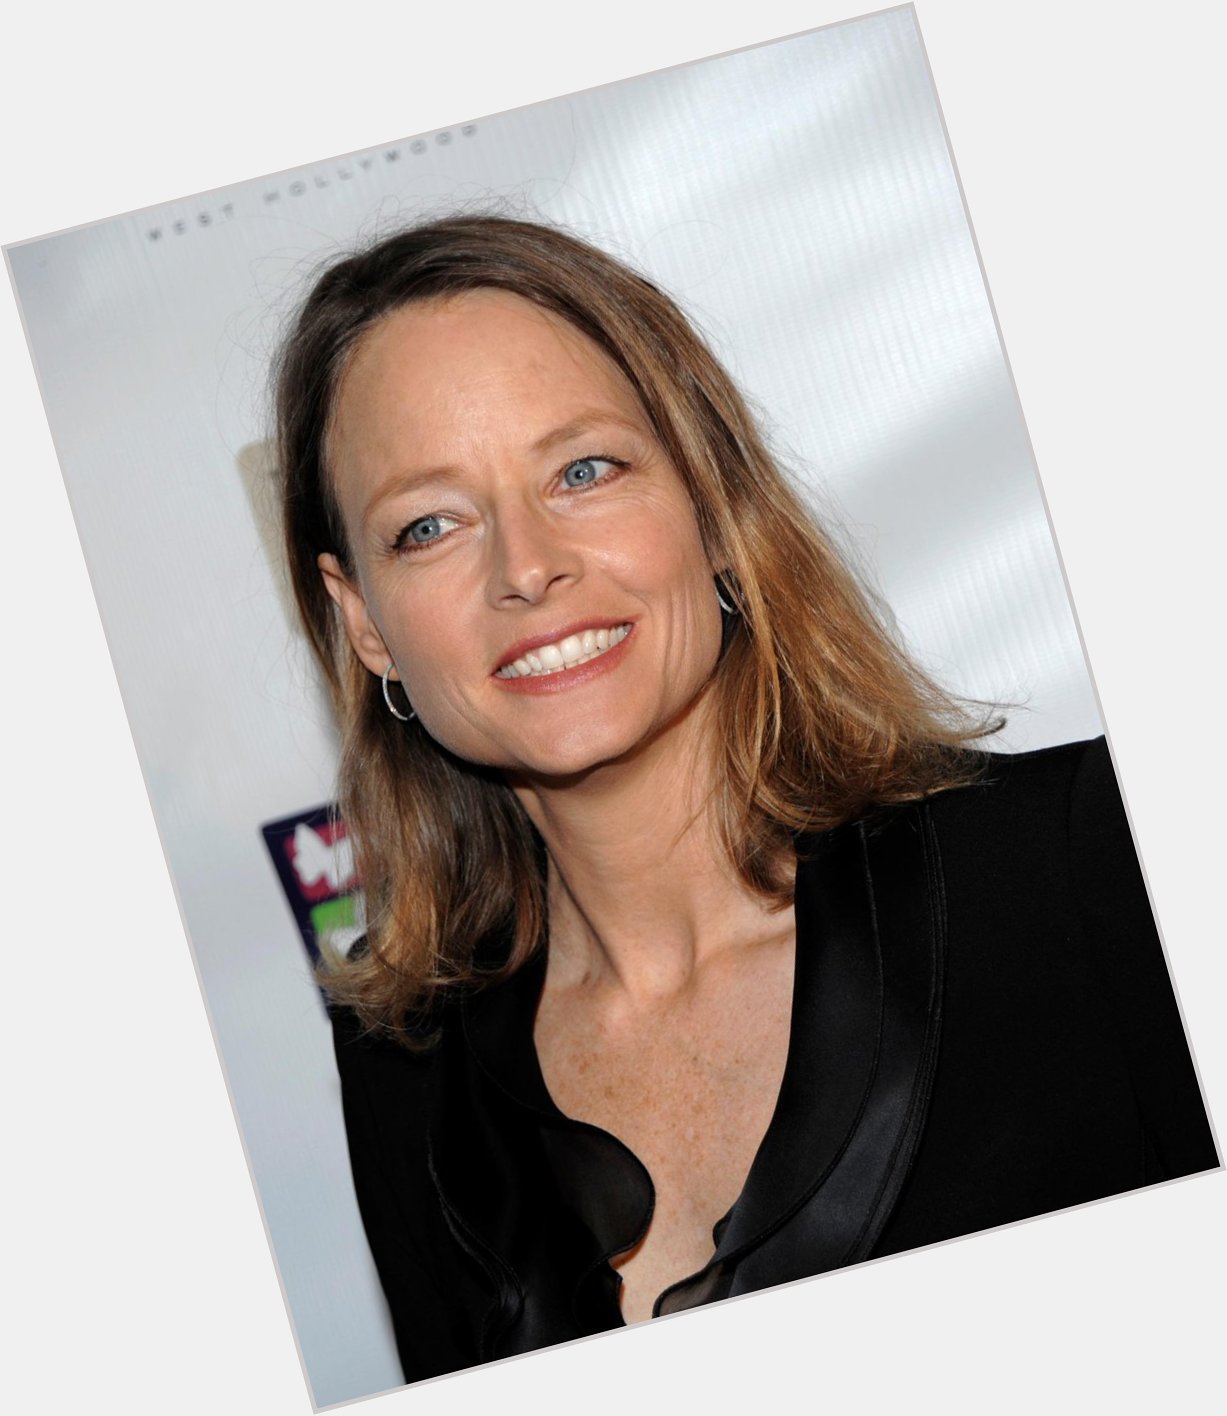 Happy Birthday to Jodie Foster, who turns 52 today! 